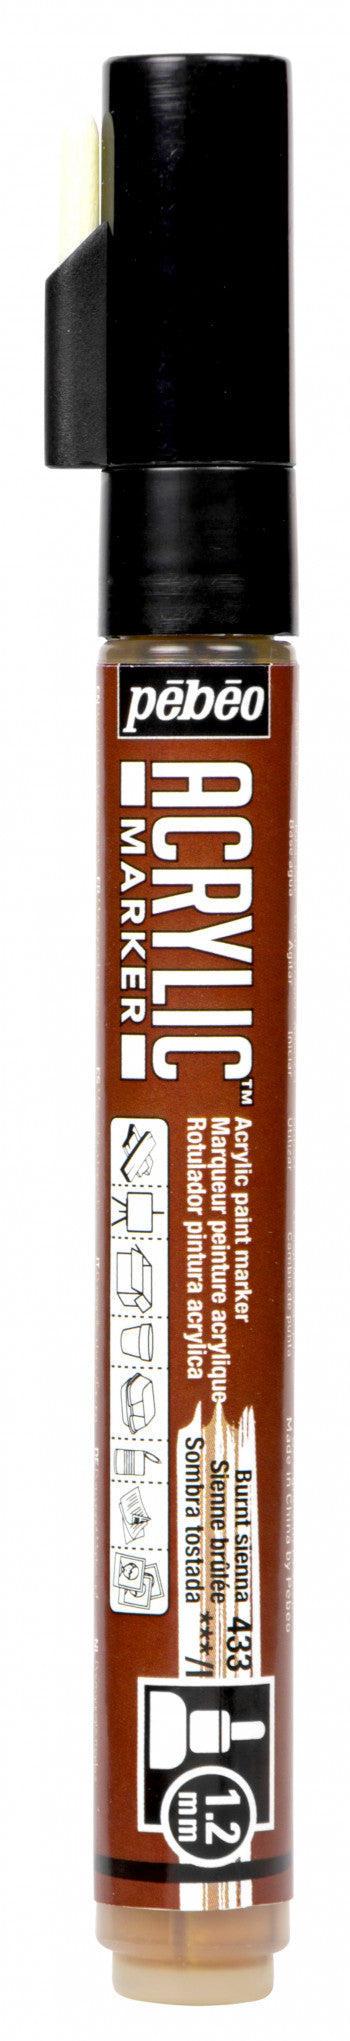 Acrylic Marker 1.2mm Pebeo     Sienne brulée - 433